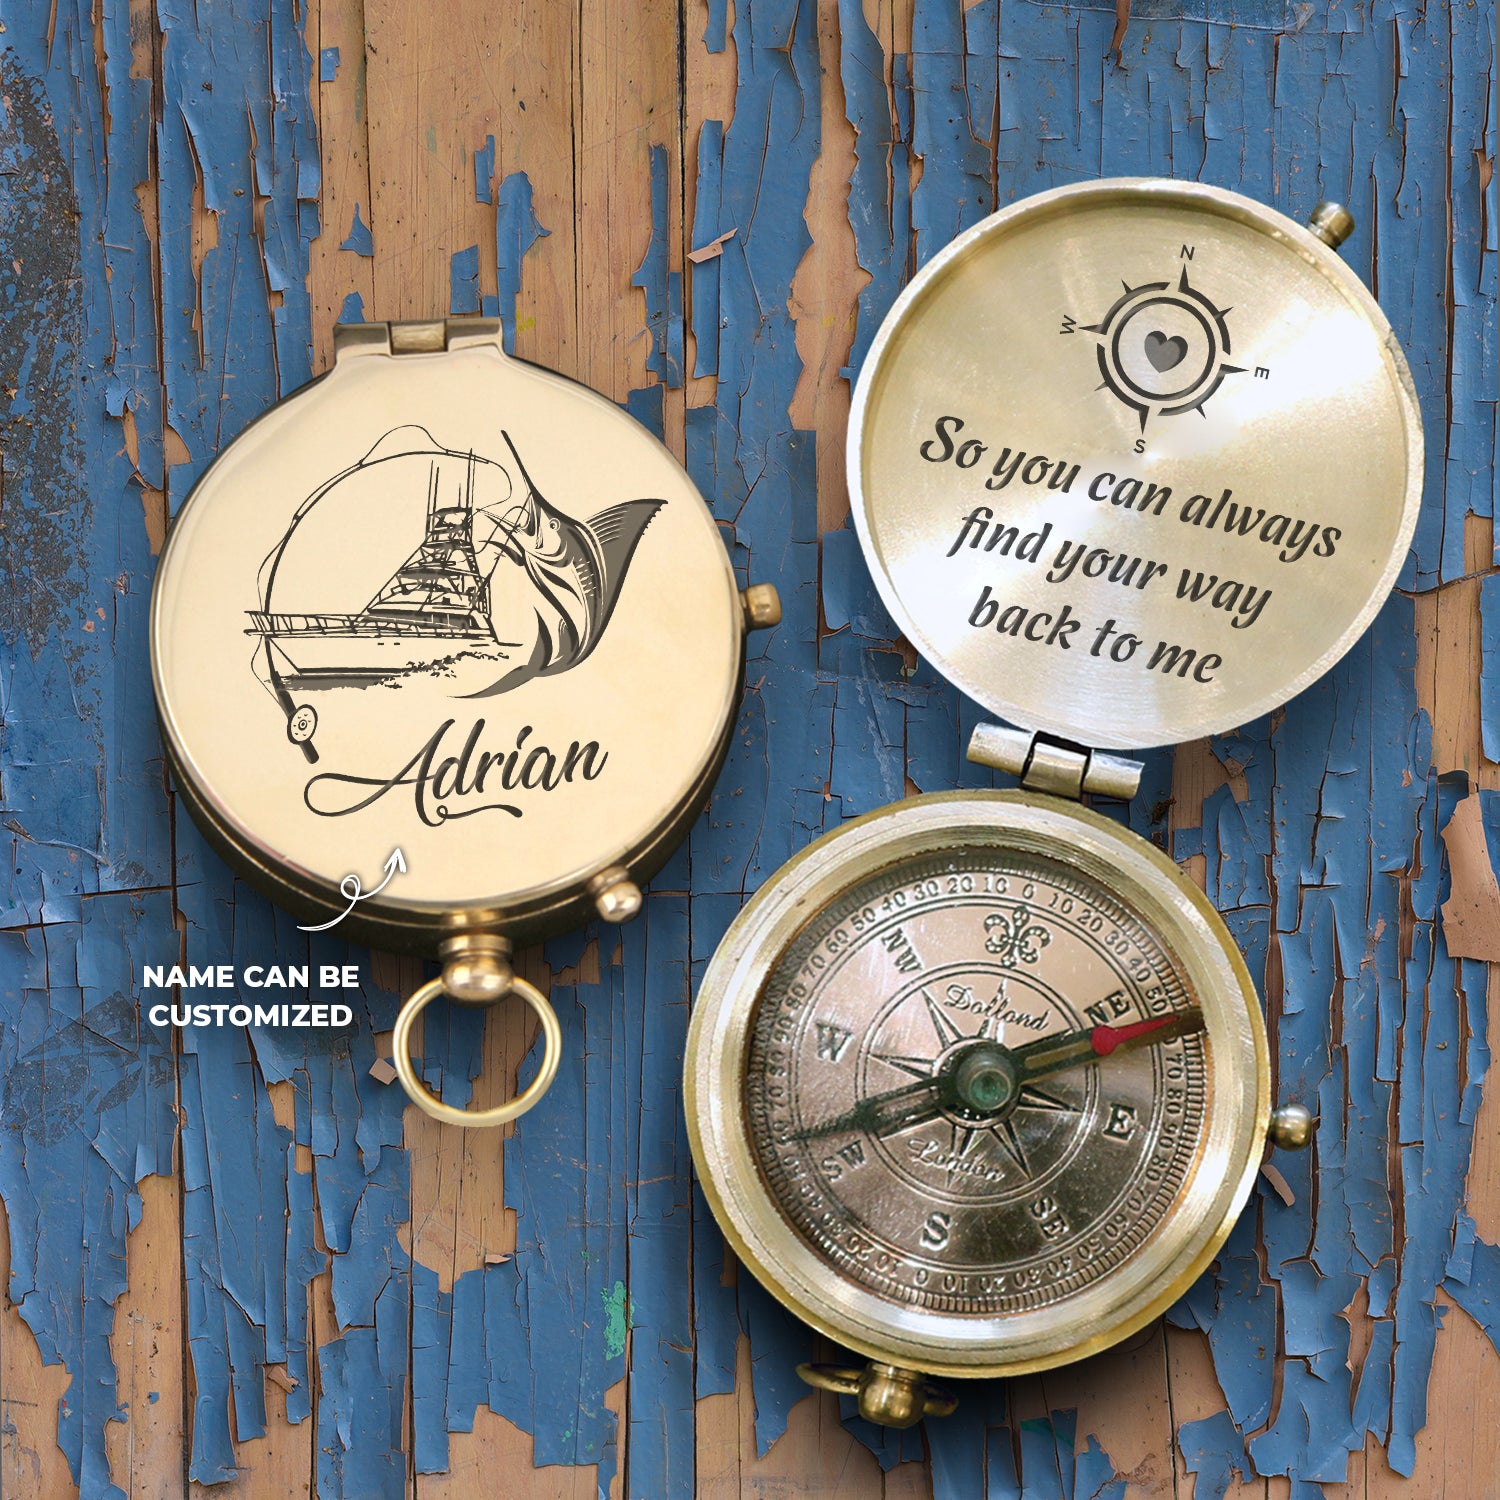 Personalised Engraved Compass - Fishing - To My Man - Back To Me - Ukgpb26033